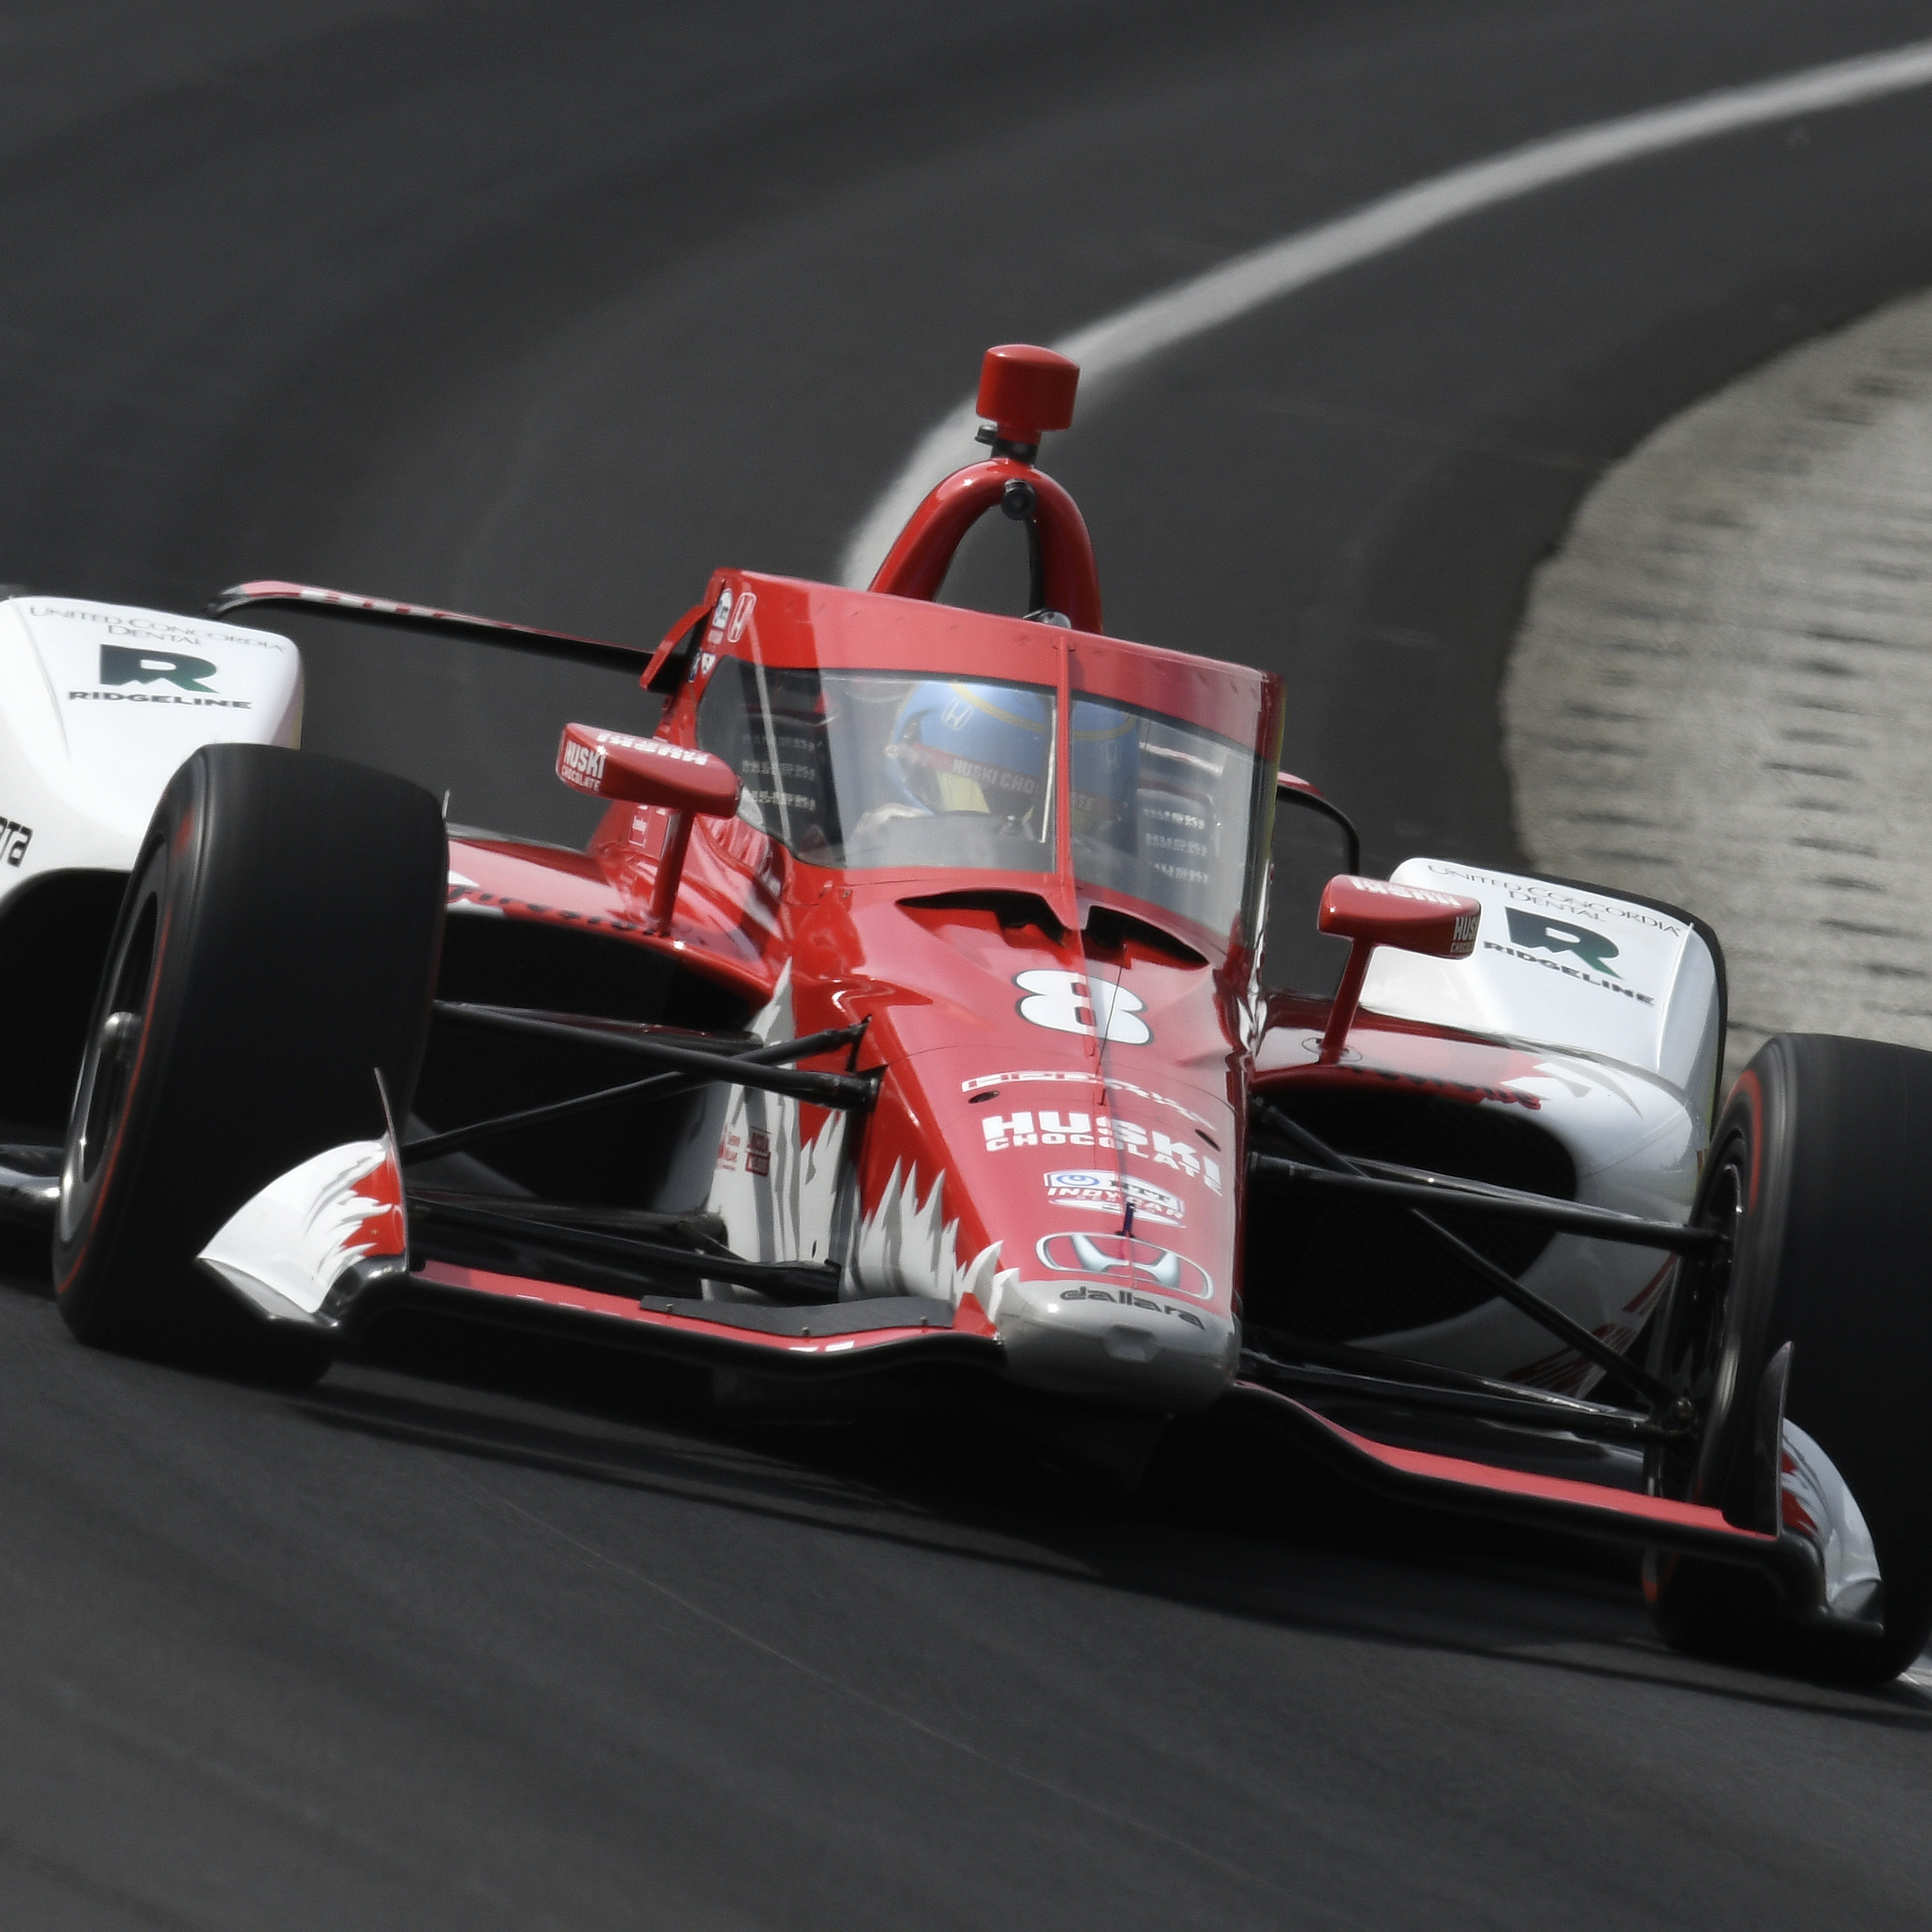 Indy 500 Results 2022: Marcus Ericsson Holds On to Win Ahead of Pato O'Ward. Bleacher Report. Latest News, Videos and Highlights